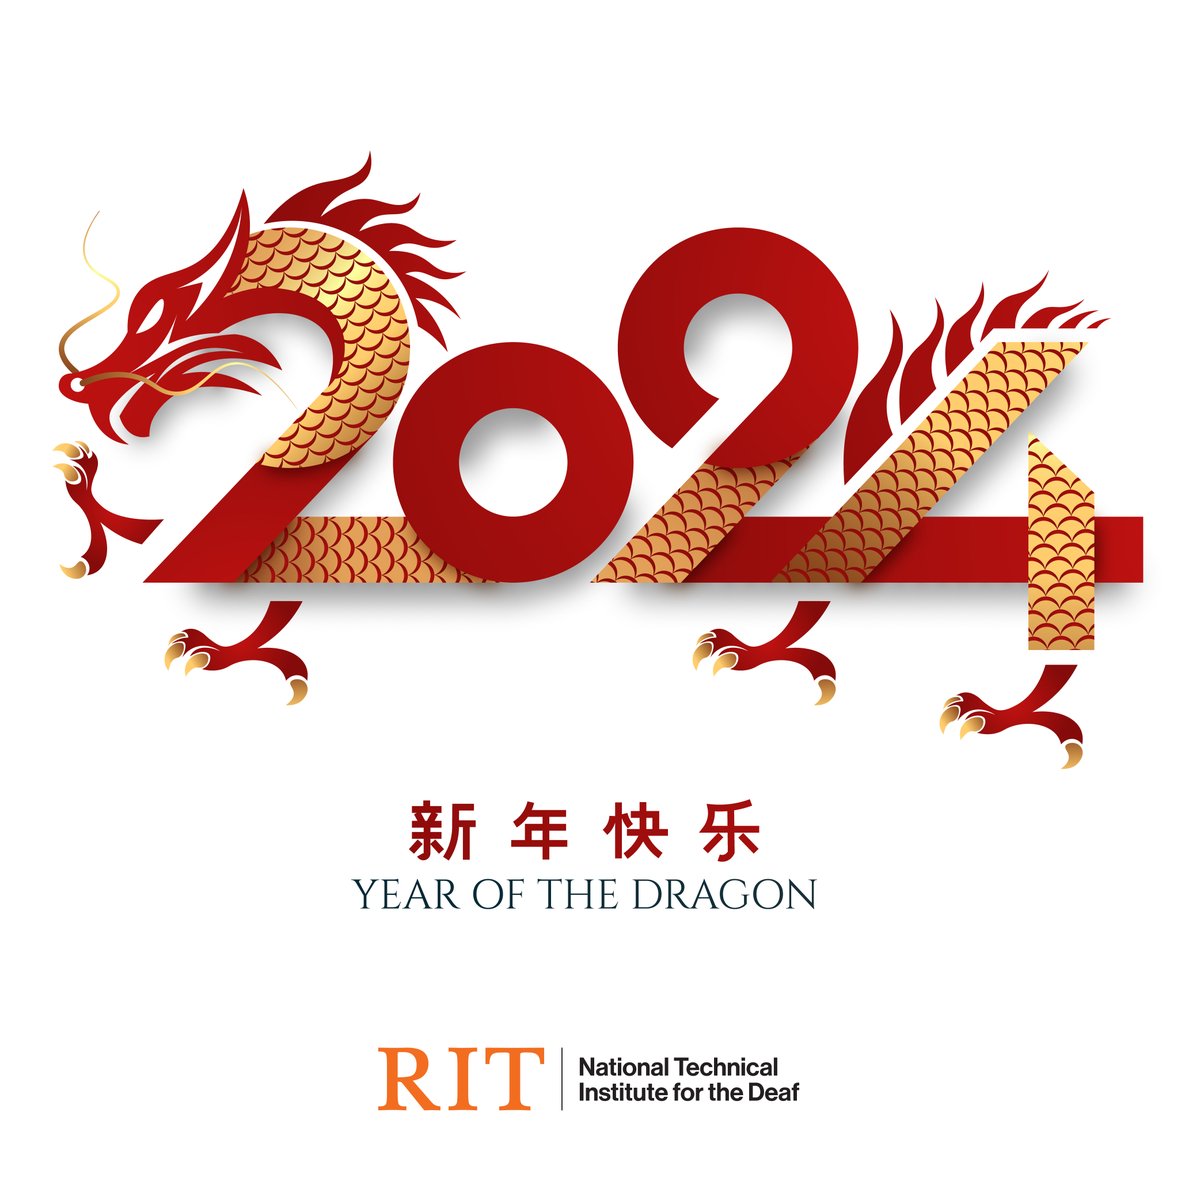 Happy Lunar New Year! 🎉🐉 As we welcome the Year of the Dragon, a symbol of strength, luck, and wisdom, let's embrace the powerful spirit of this majestic creature. May this new year bring prosperity, courage, and new opportunities to learn and grow together. 新年快乐!